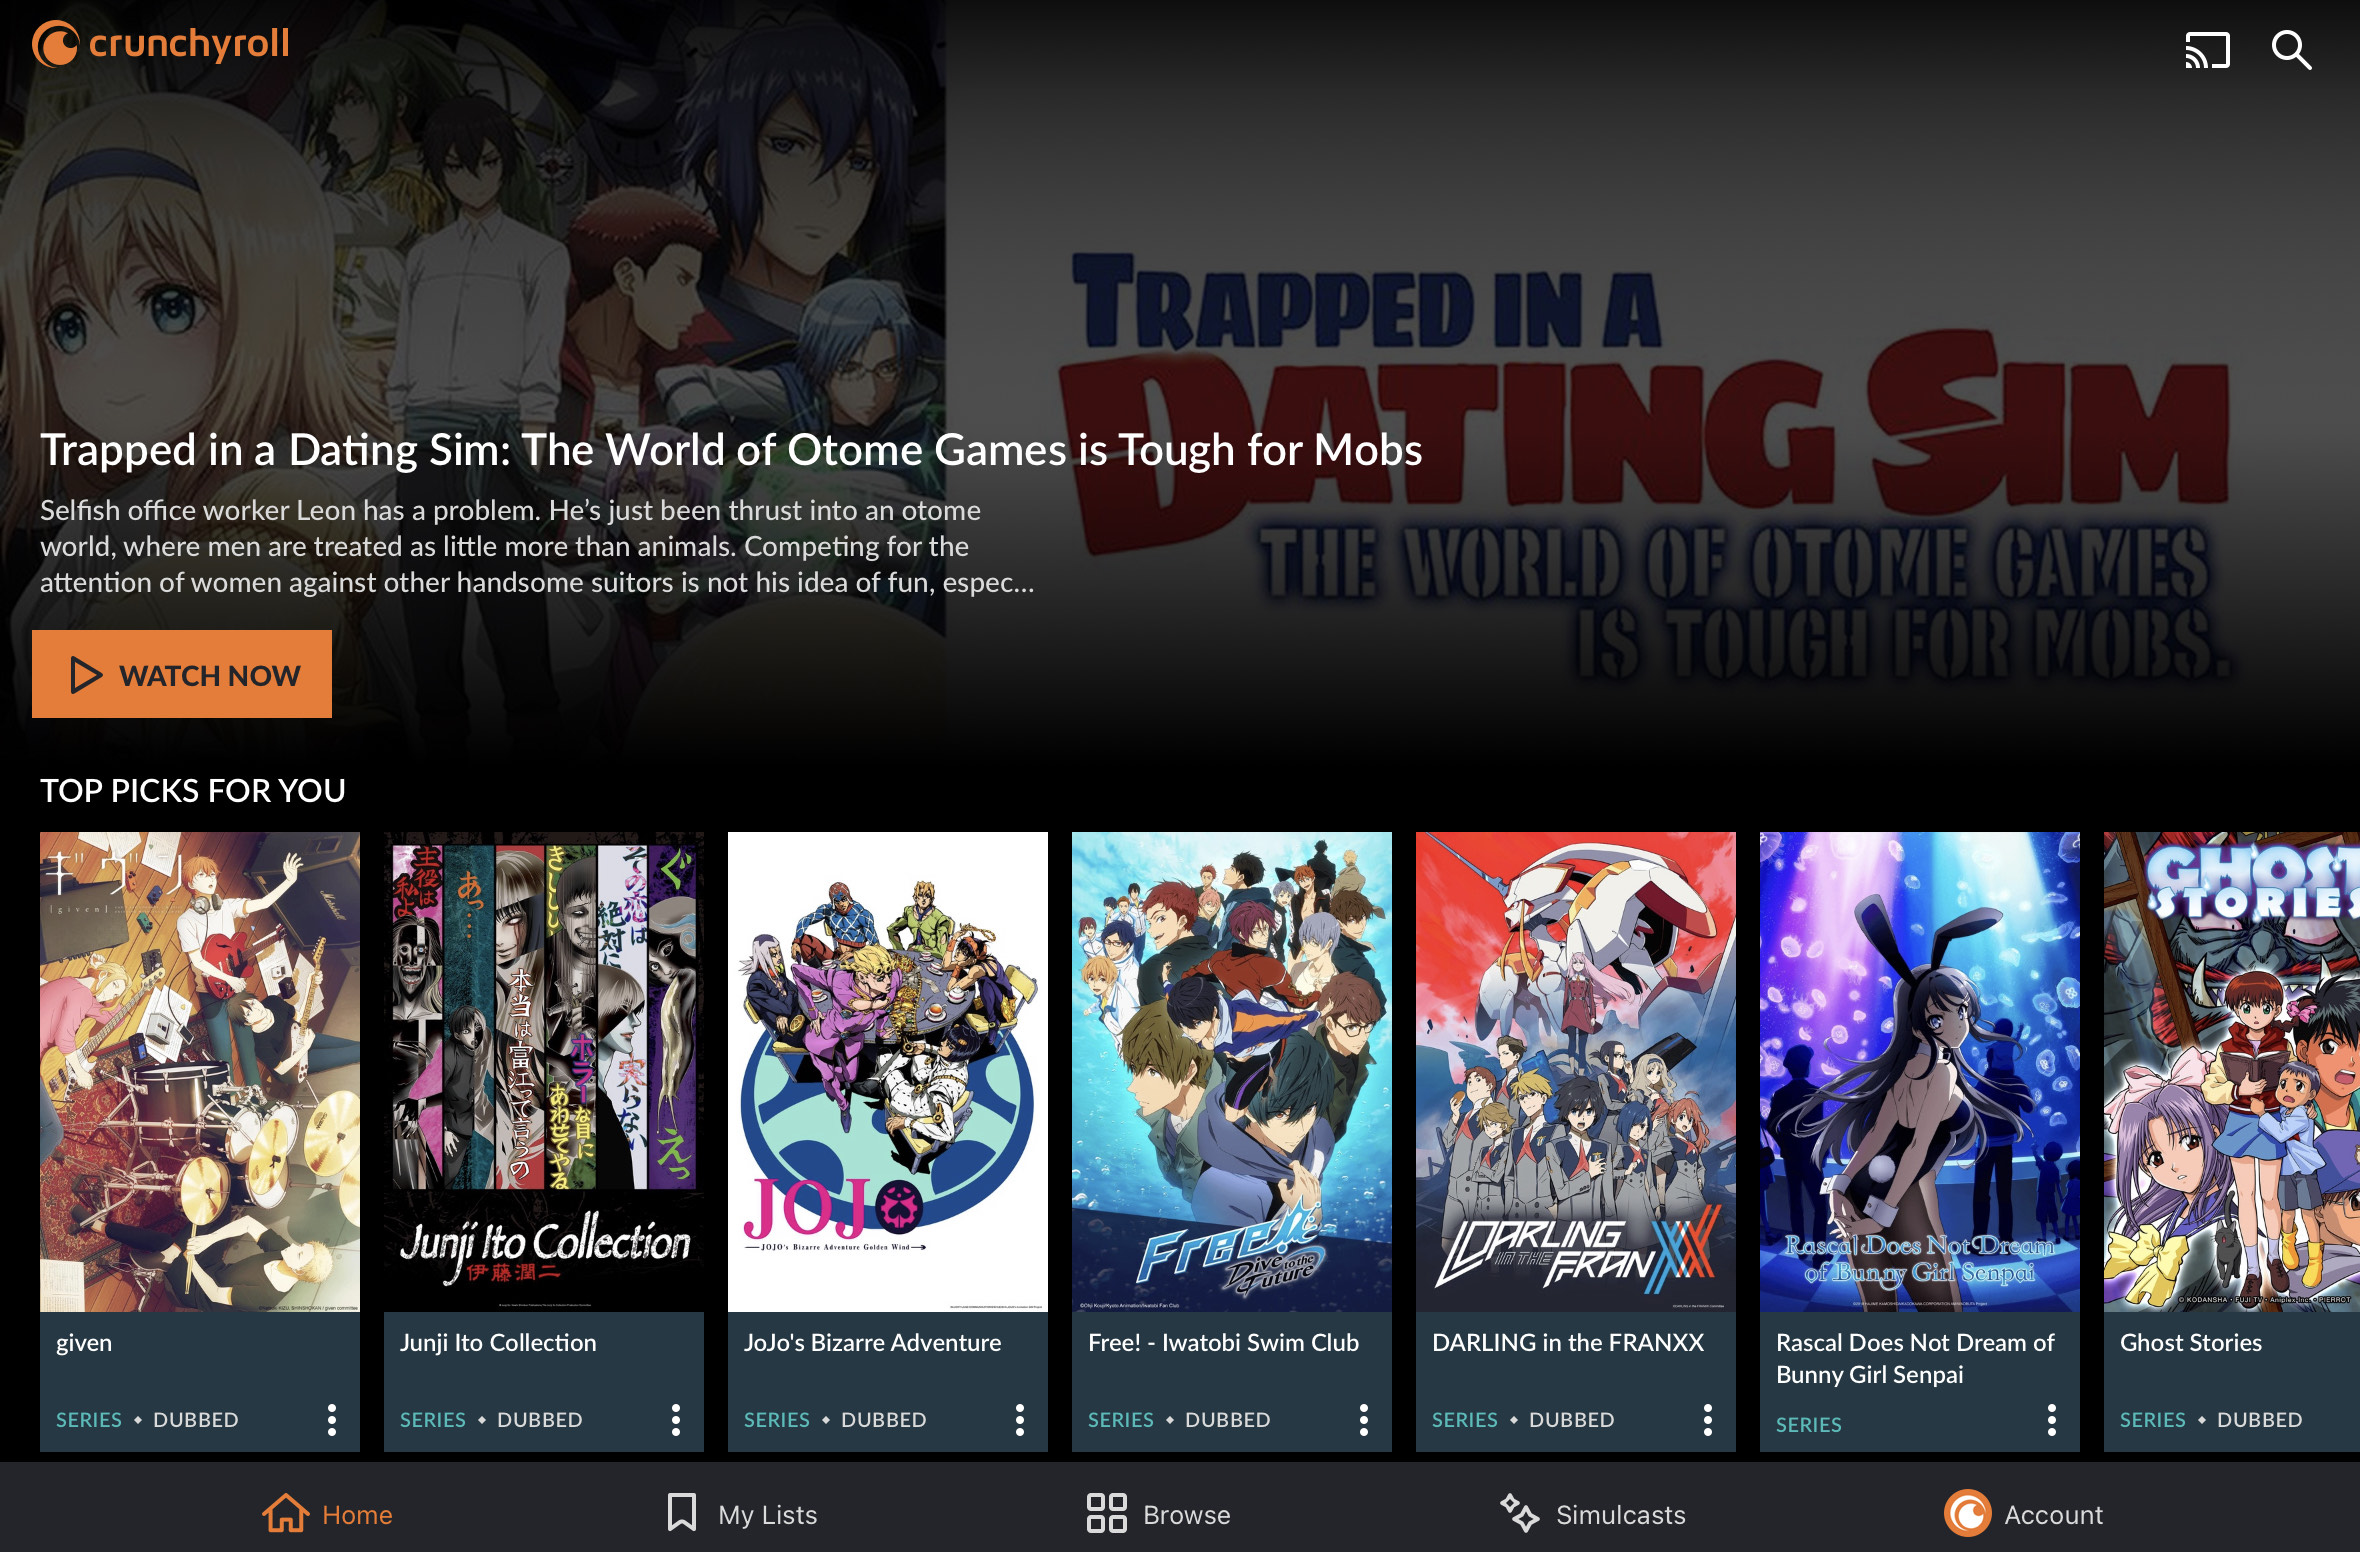 Magical Sempai: Where to Watch and Stream Online